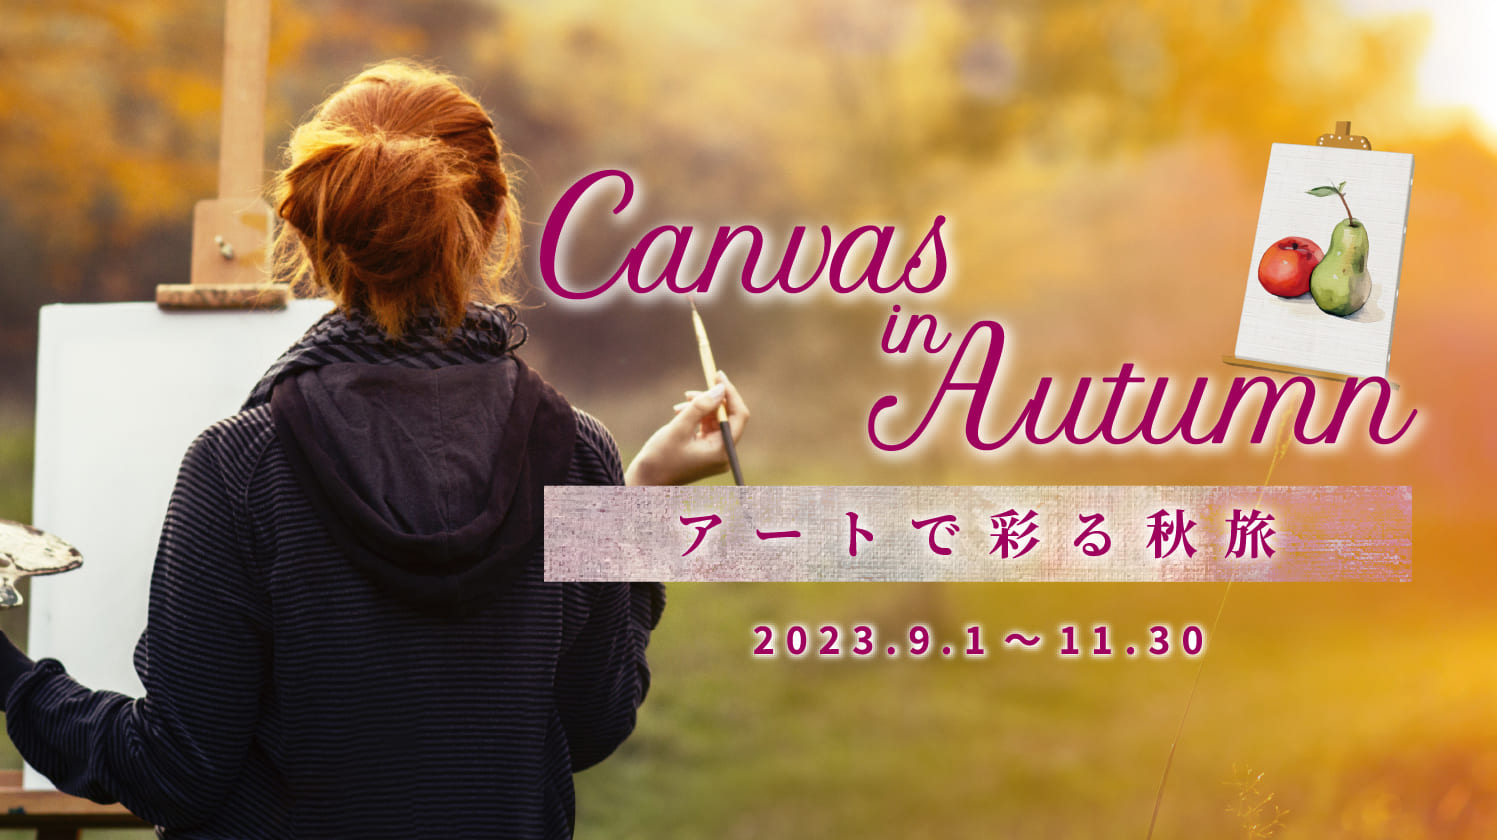 Canvas in Autumn アートで彩る秋旅　期間：2023.9.1～11.30